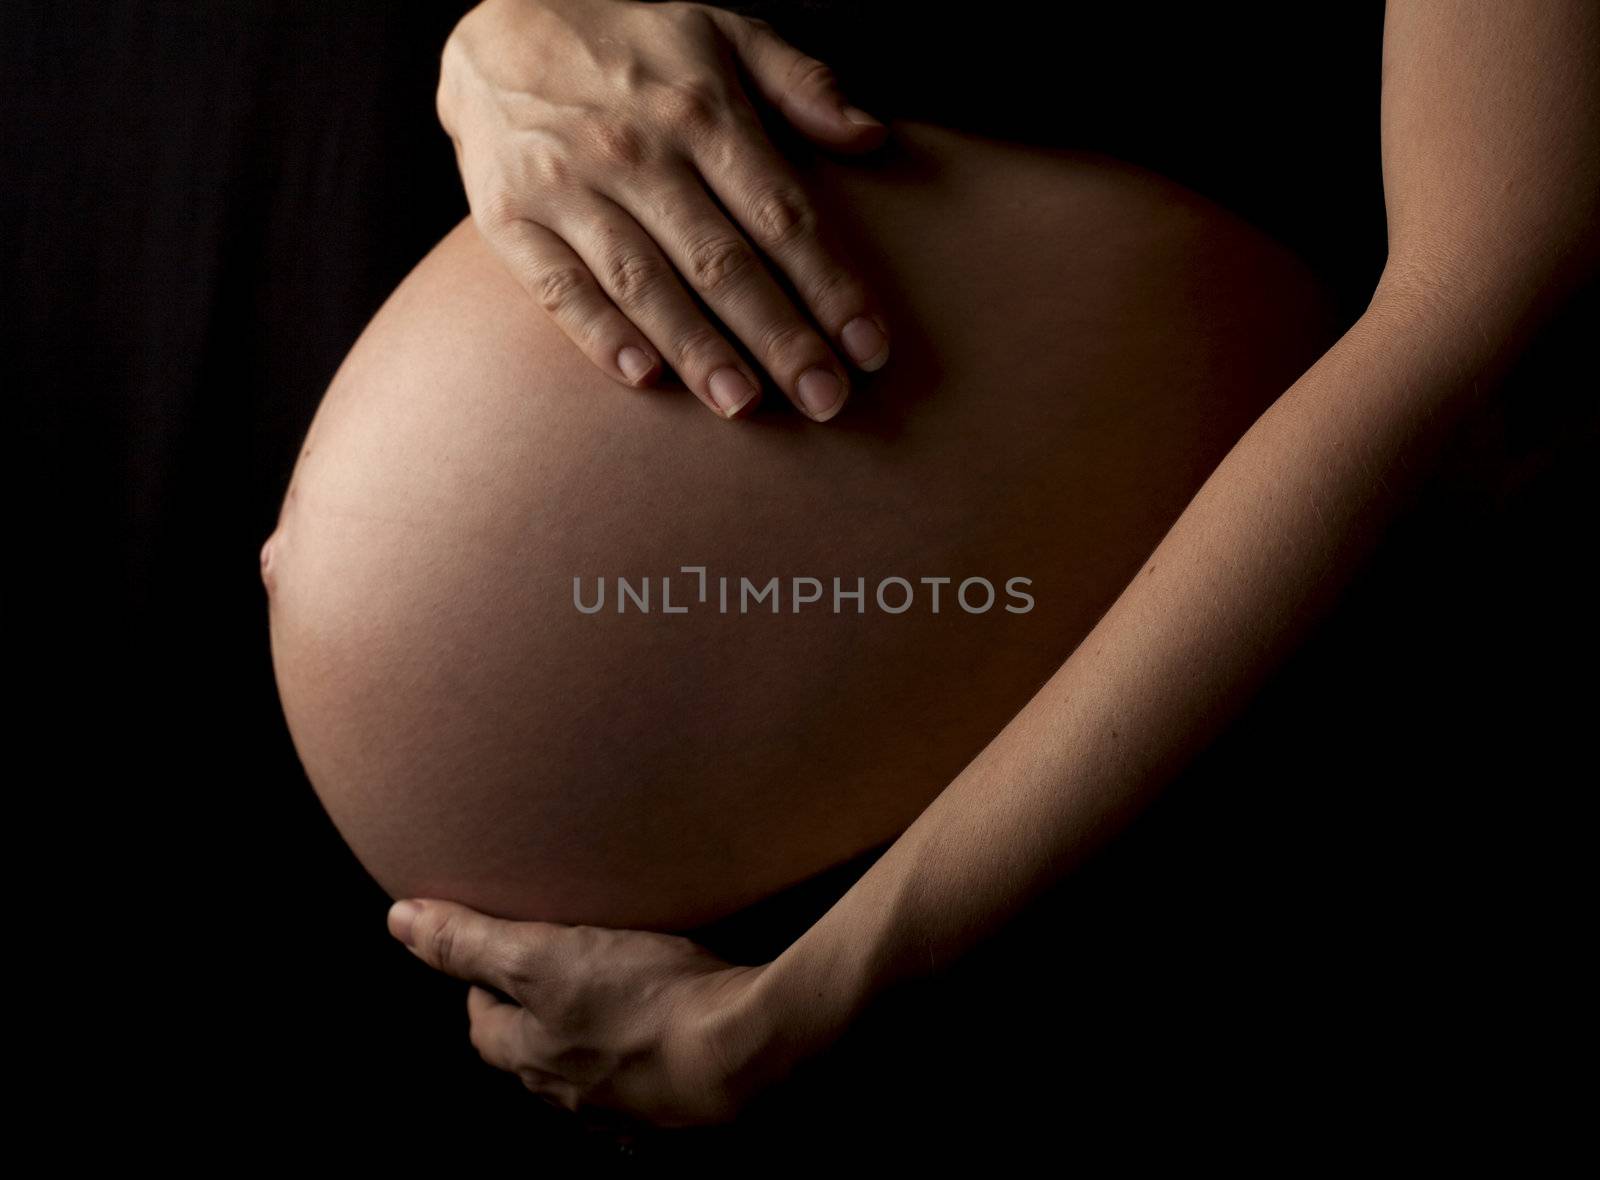 close up of a pregnant womans stomach, isolated on black background.